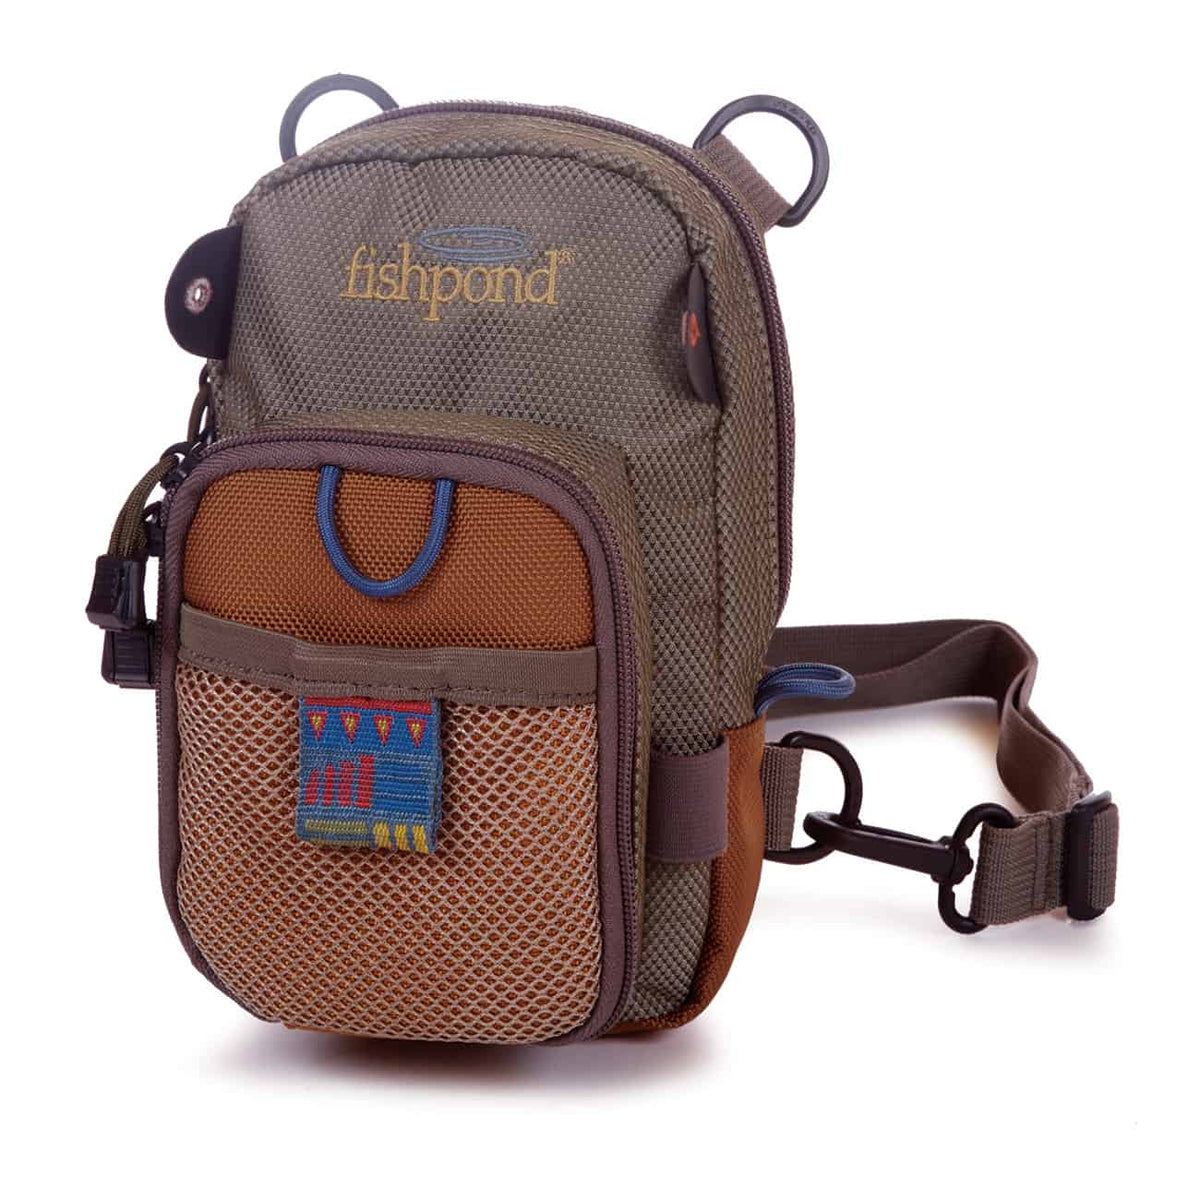 fishpond san juan vertical fishing chest pack sand and saddle brown